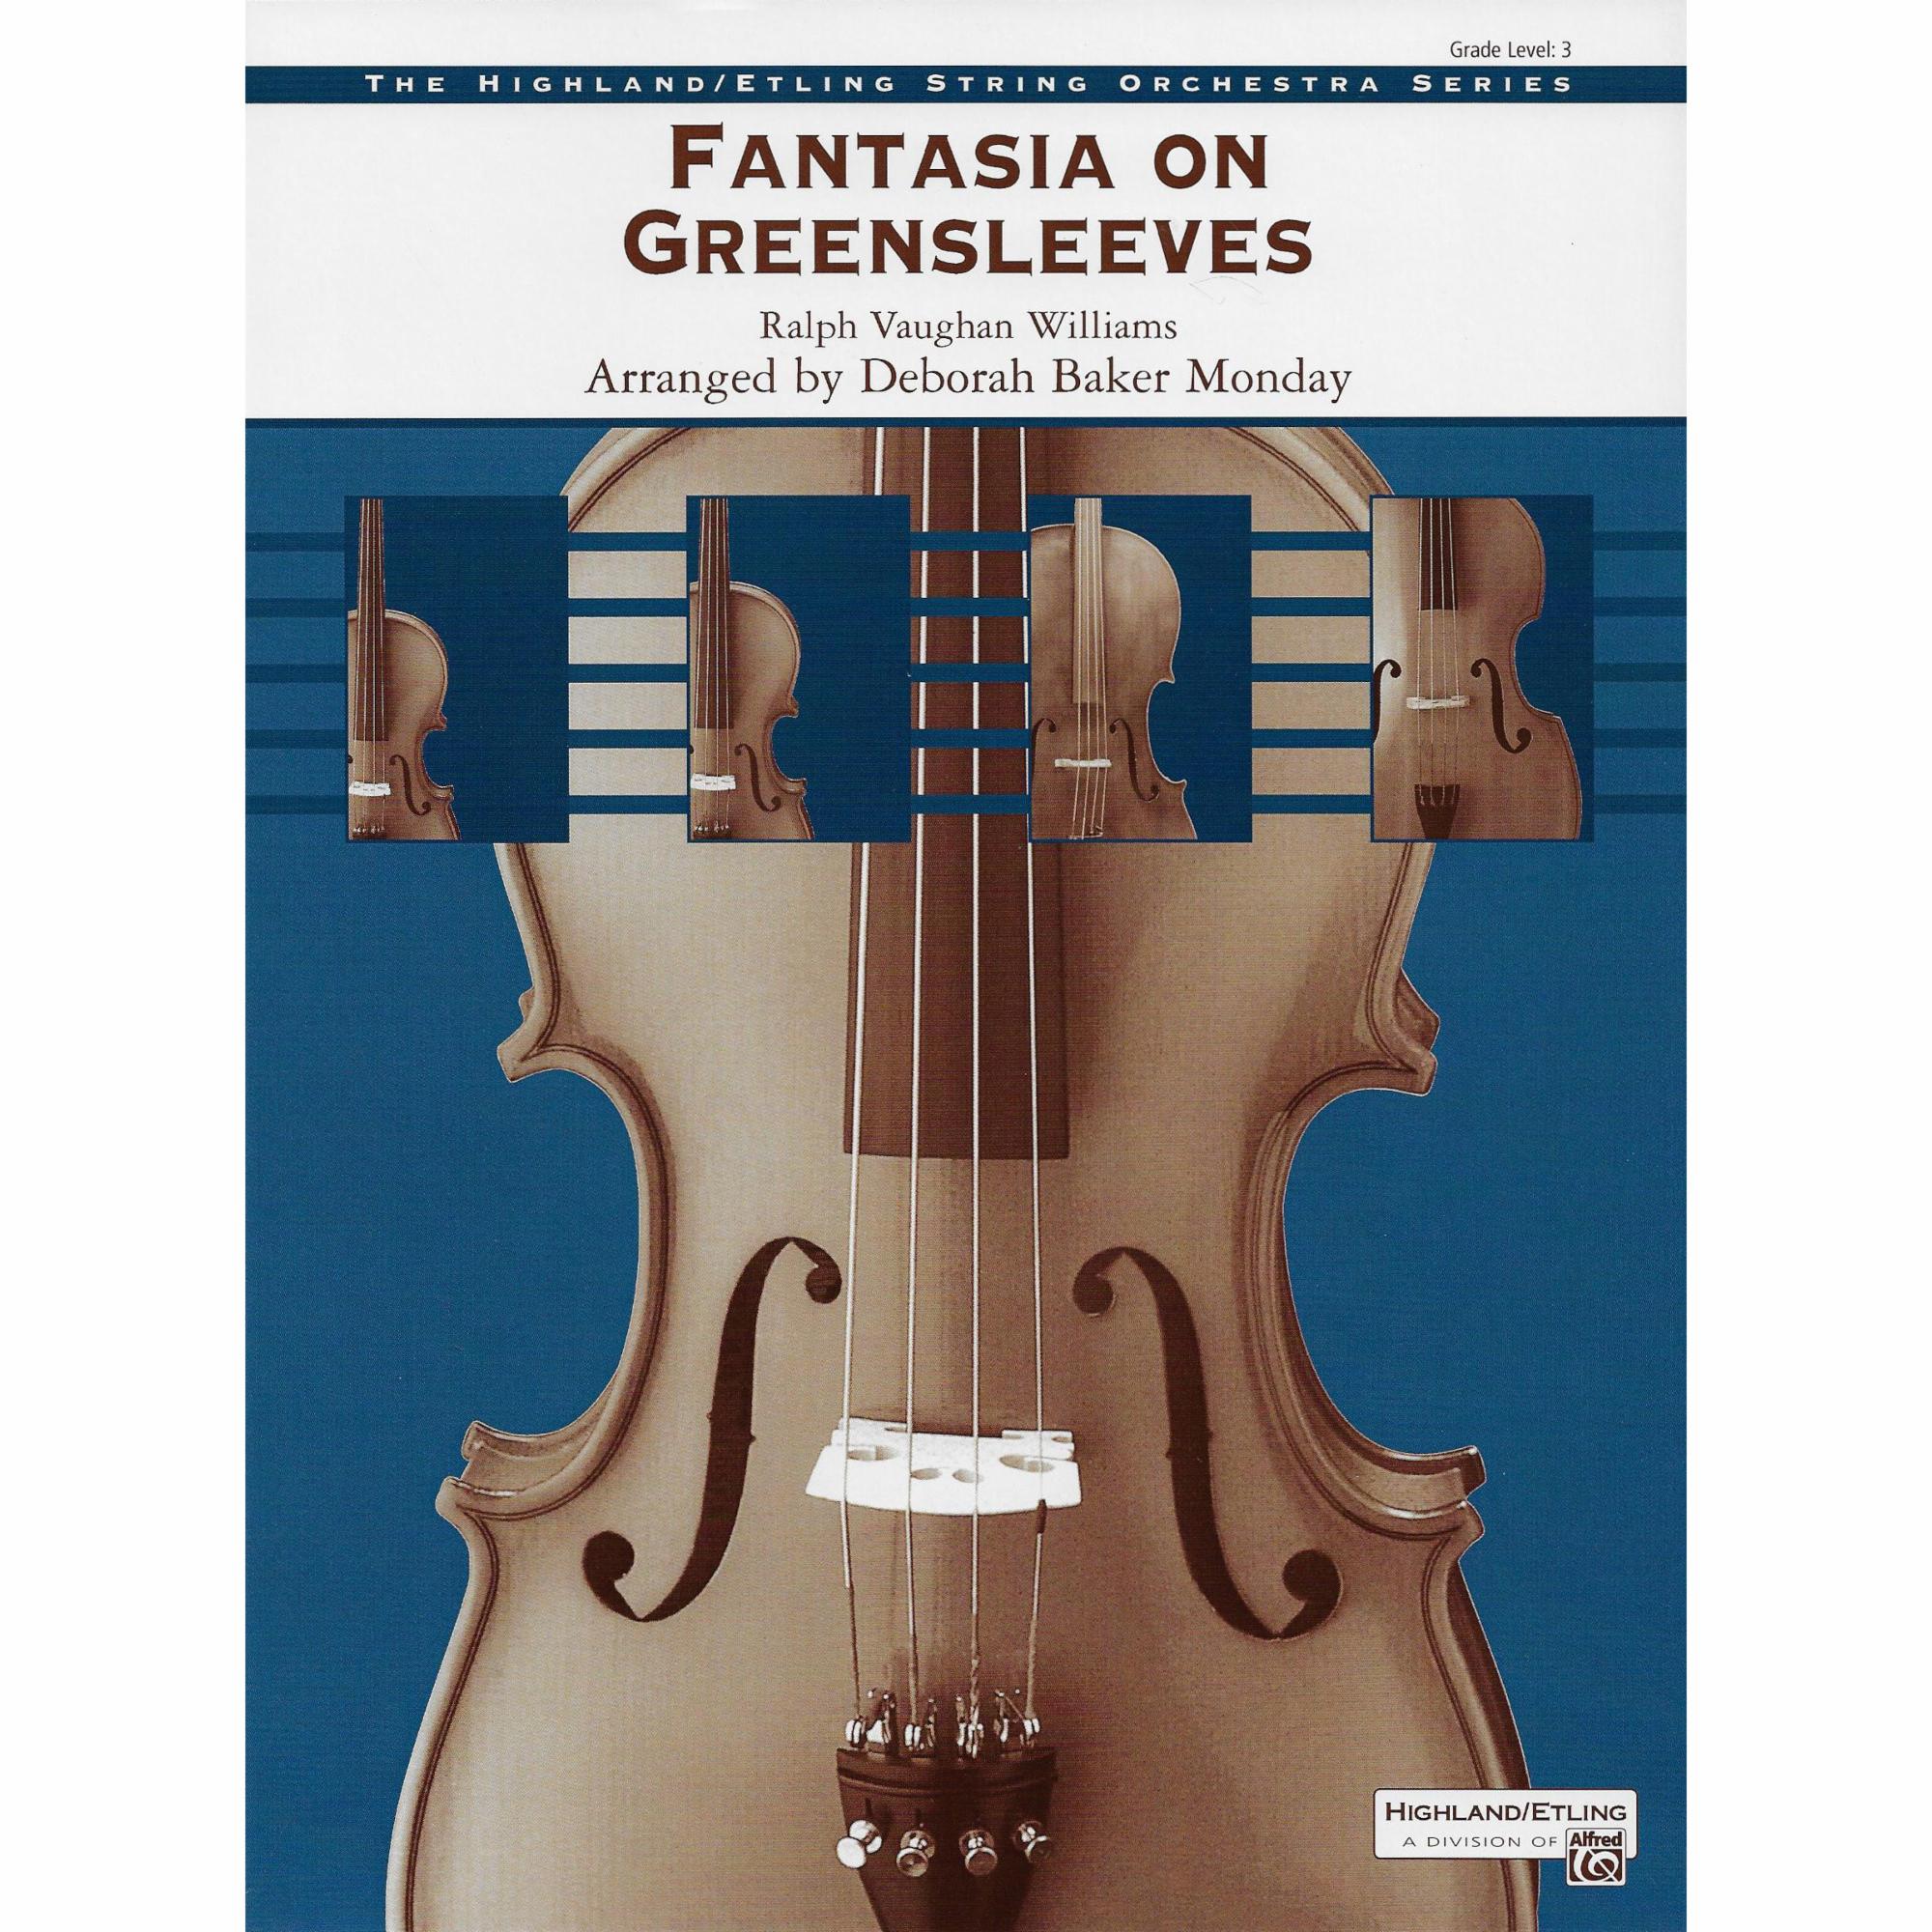 Fantasia on Greensleeves for String Orchestra